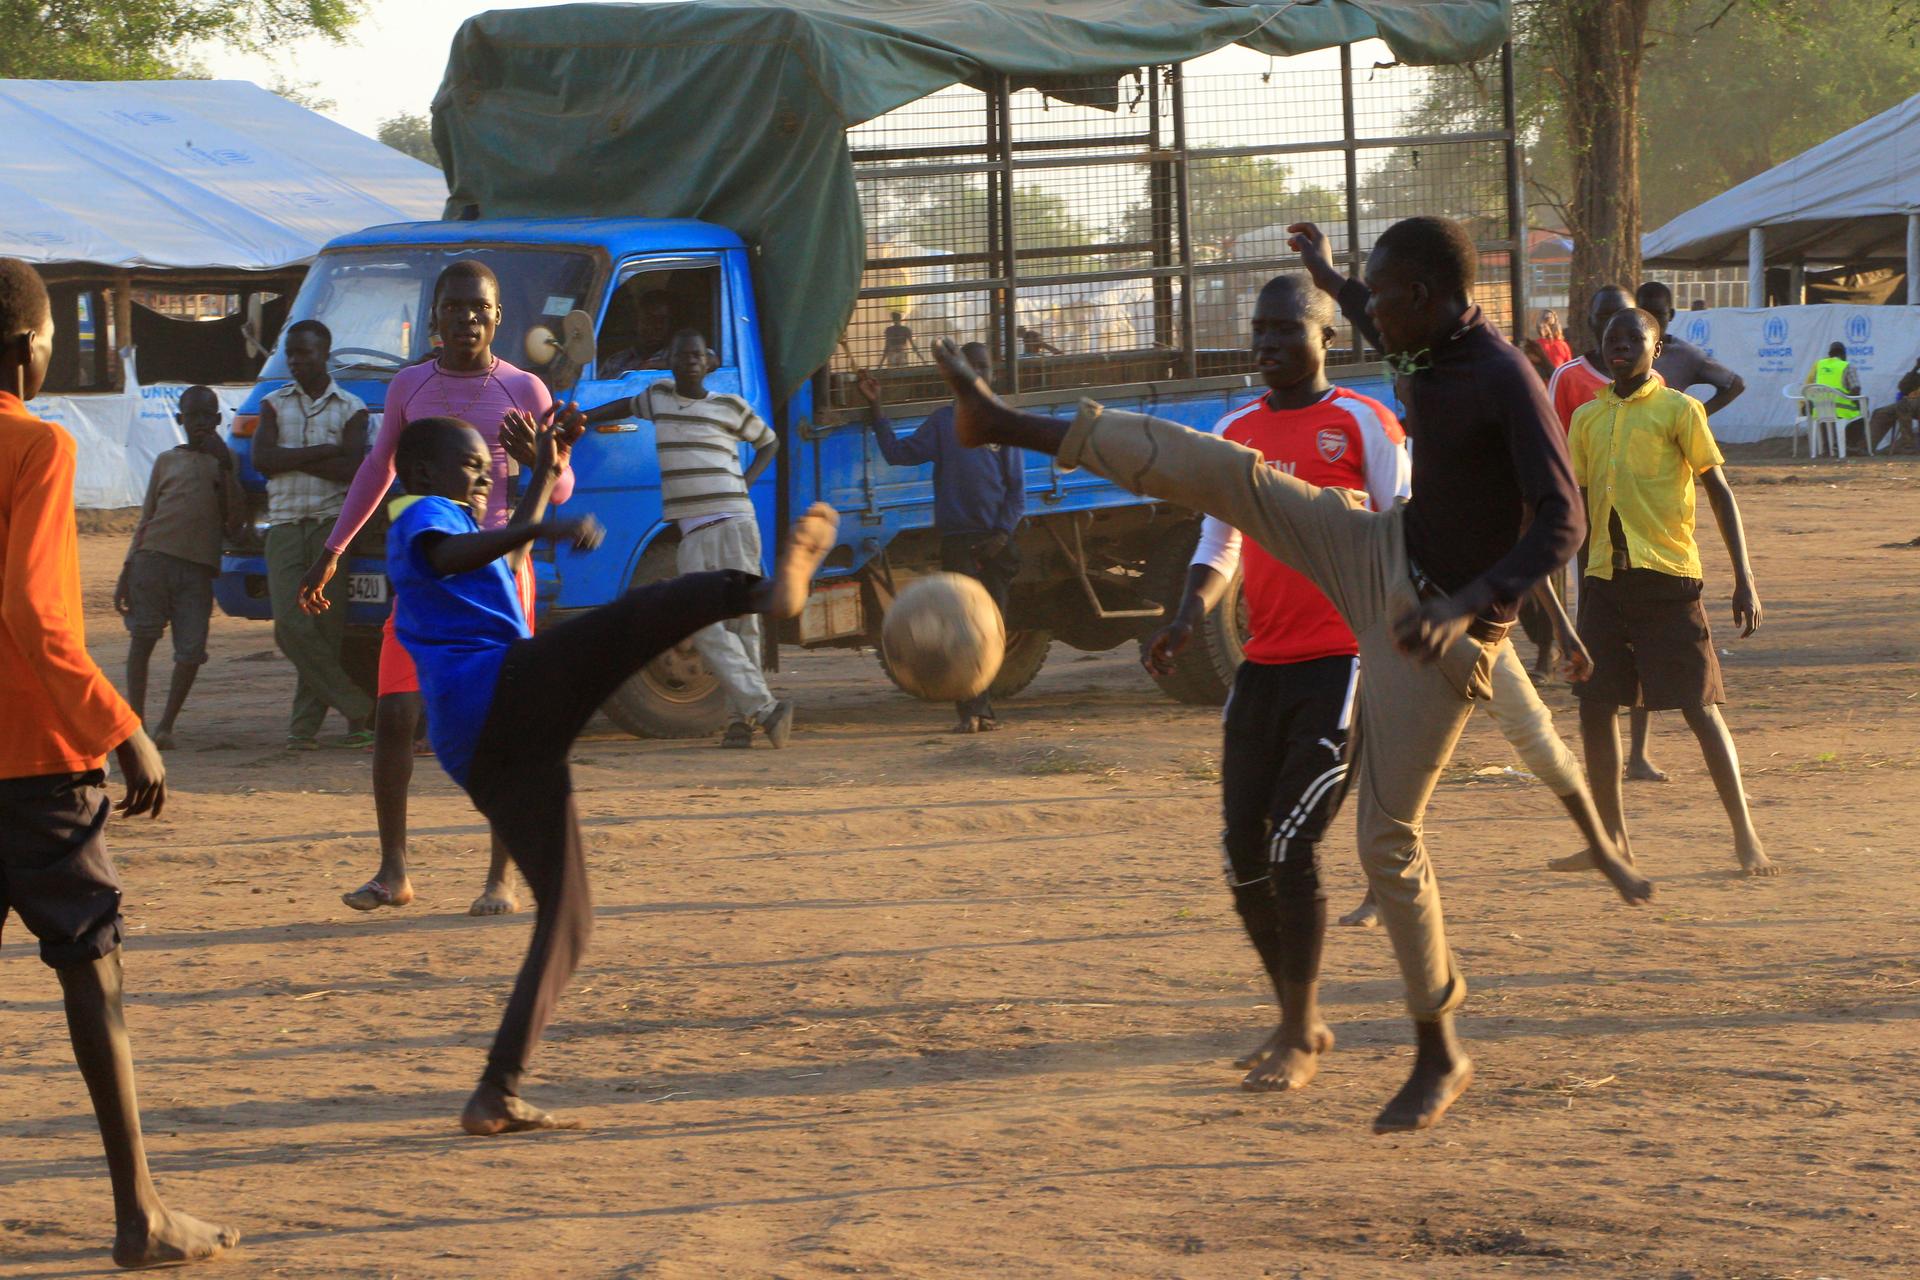 youth play soccer near trucks at refugee camp